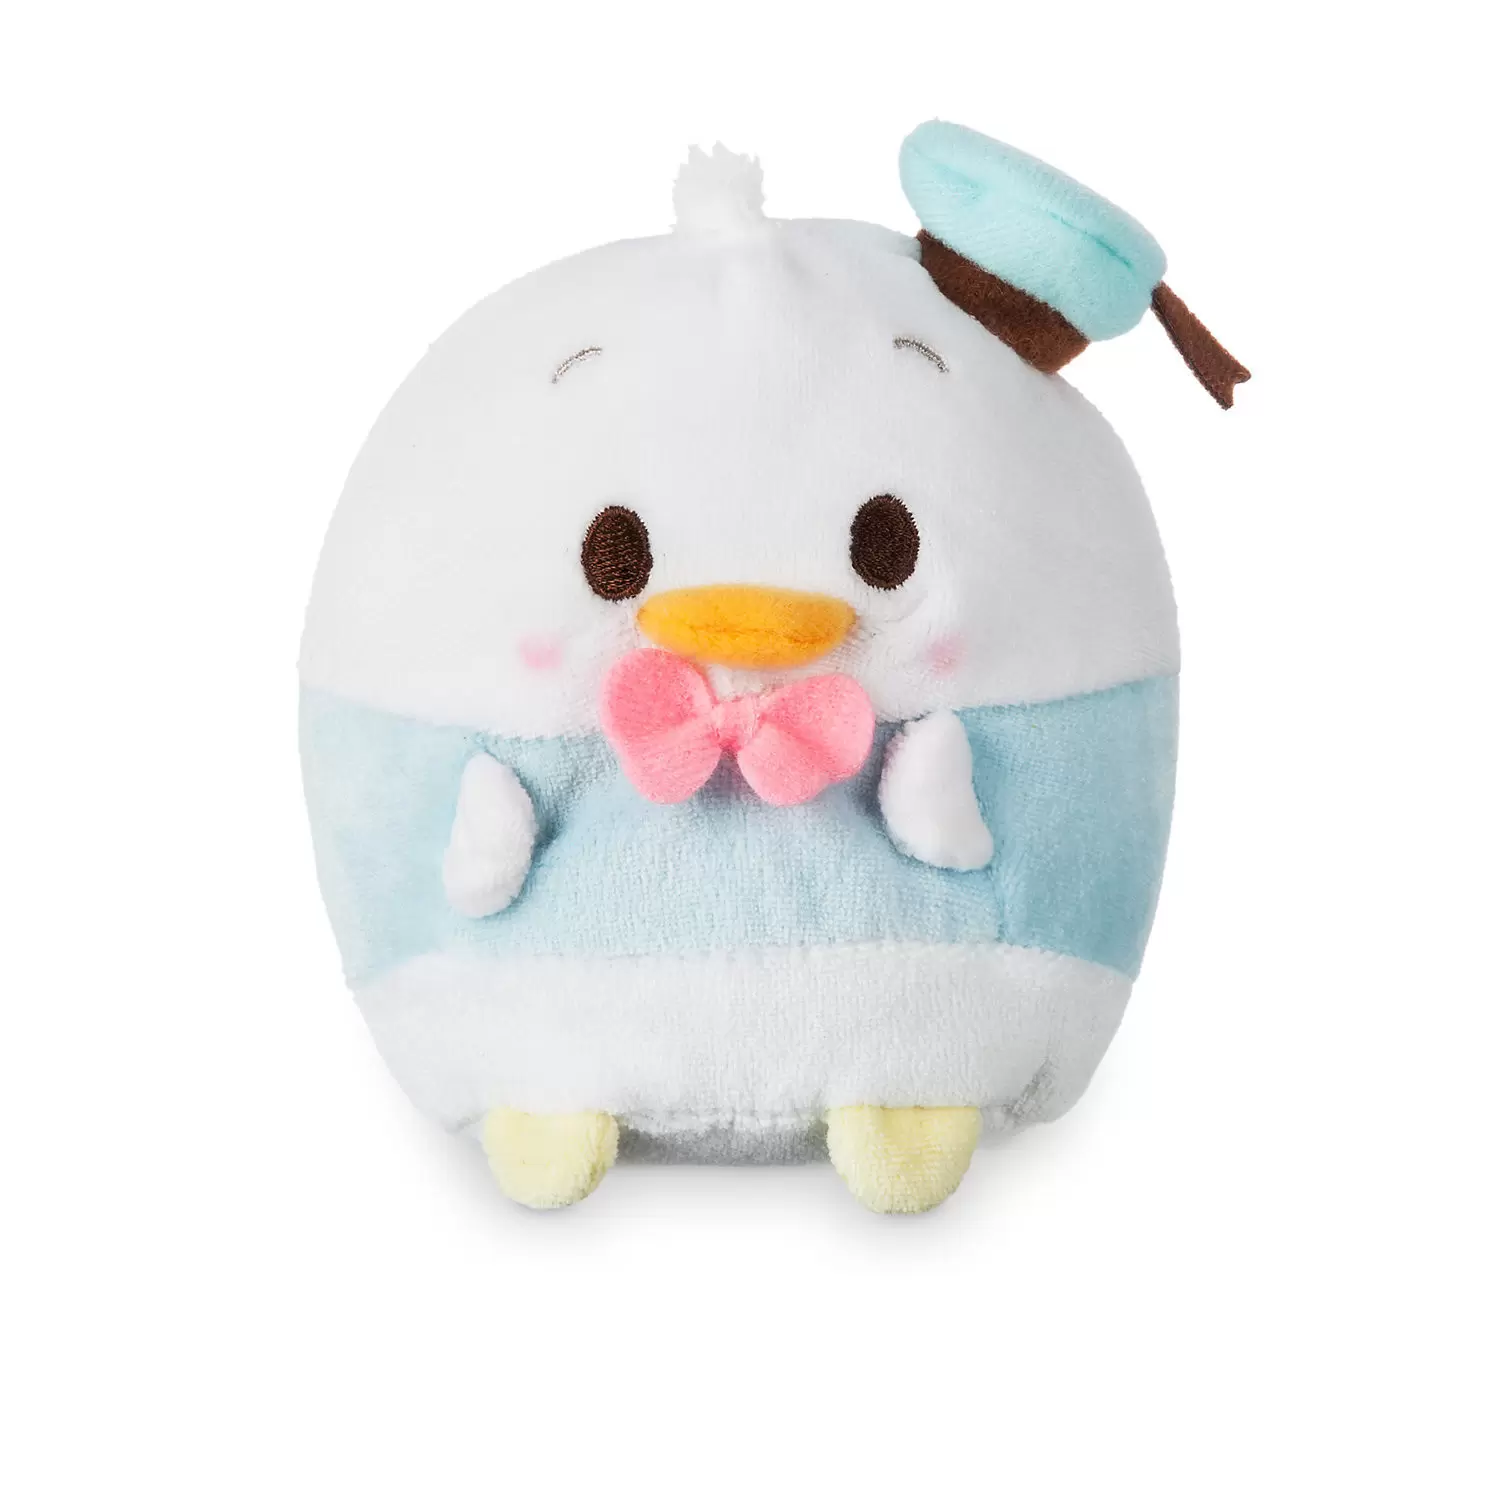 Ufufy - Donald Scented